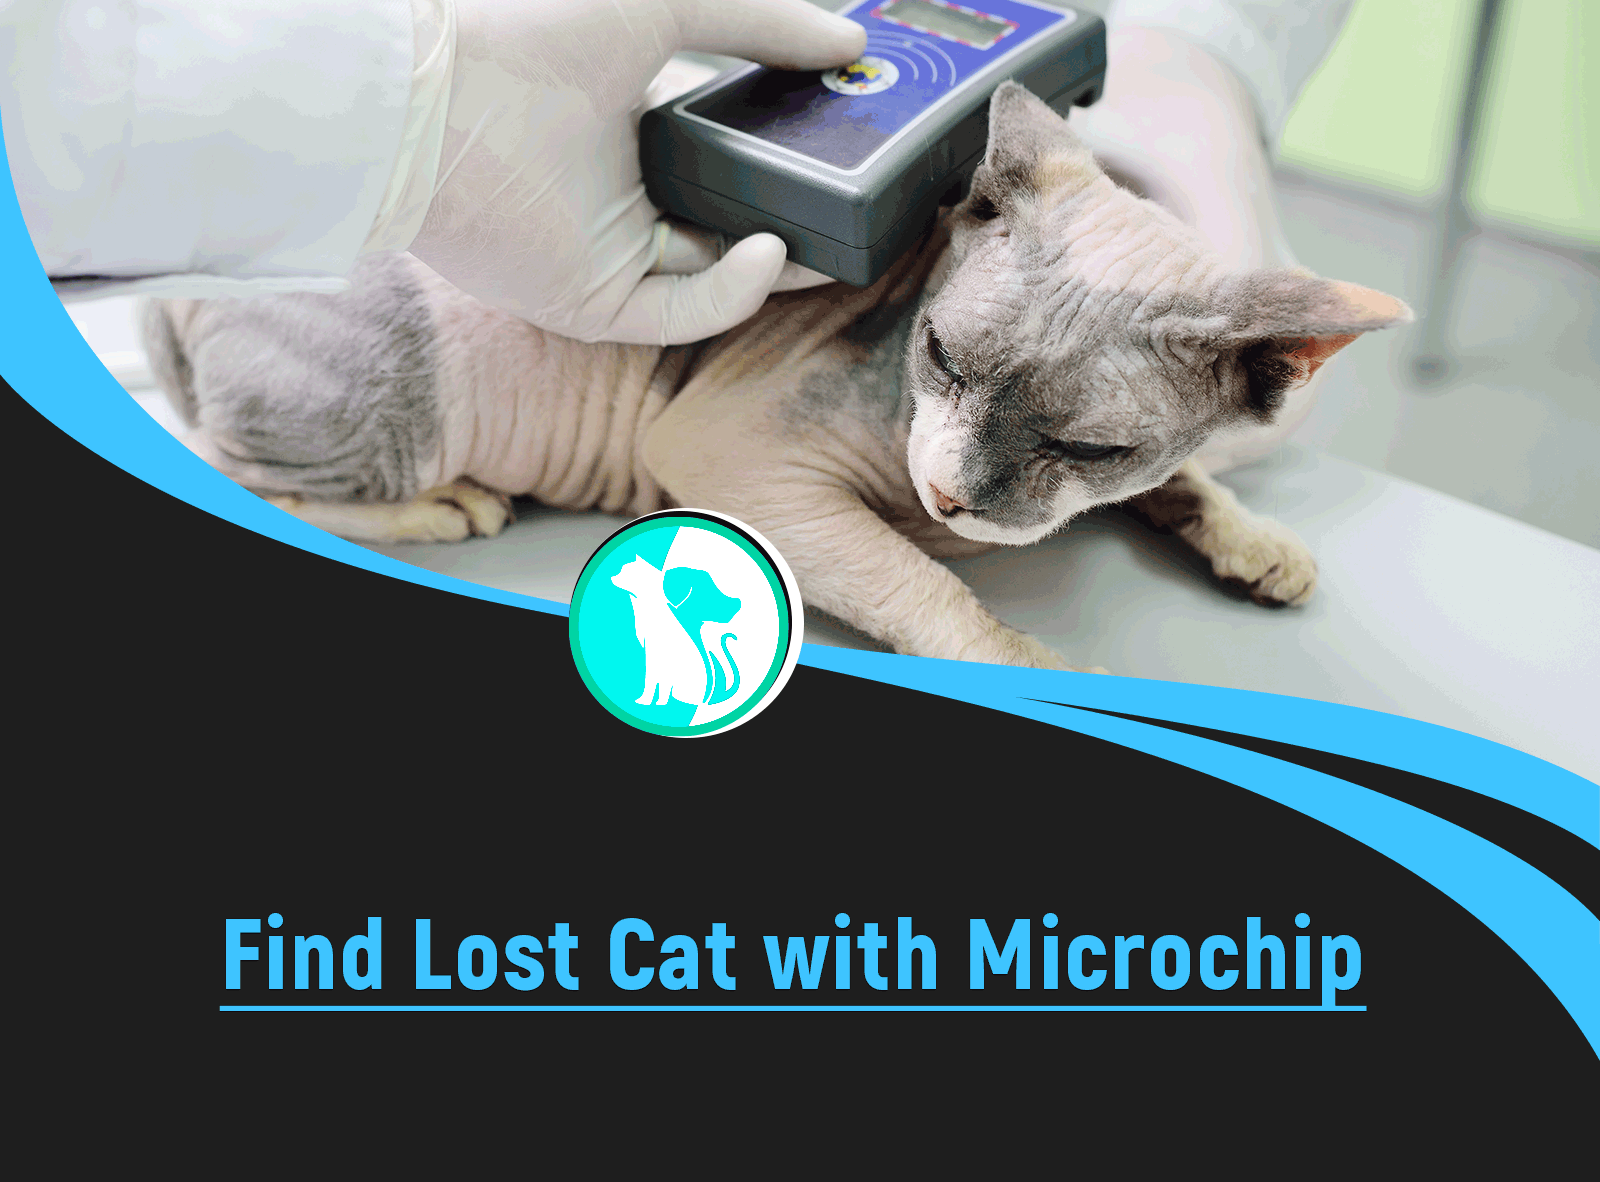 How to Find a Lost Cat with a Microchip